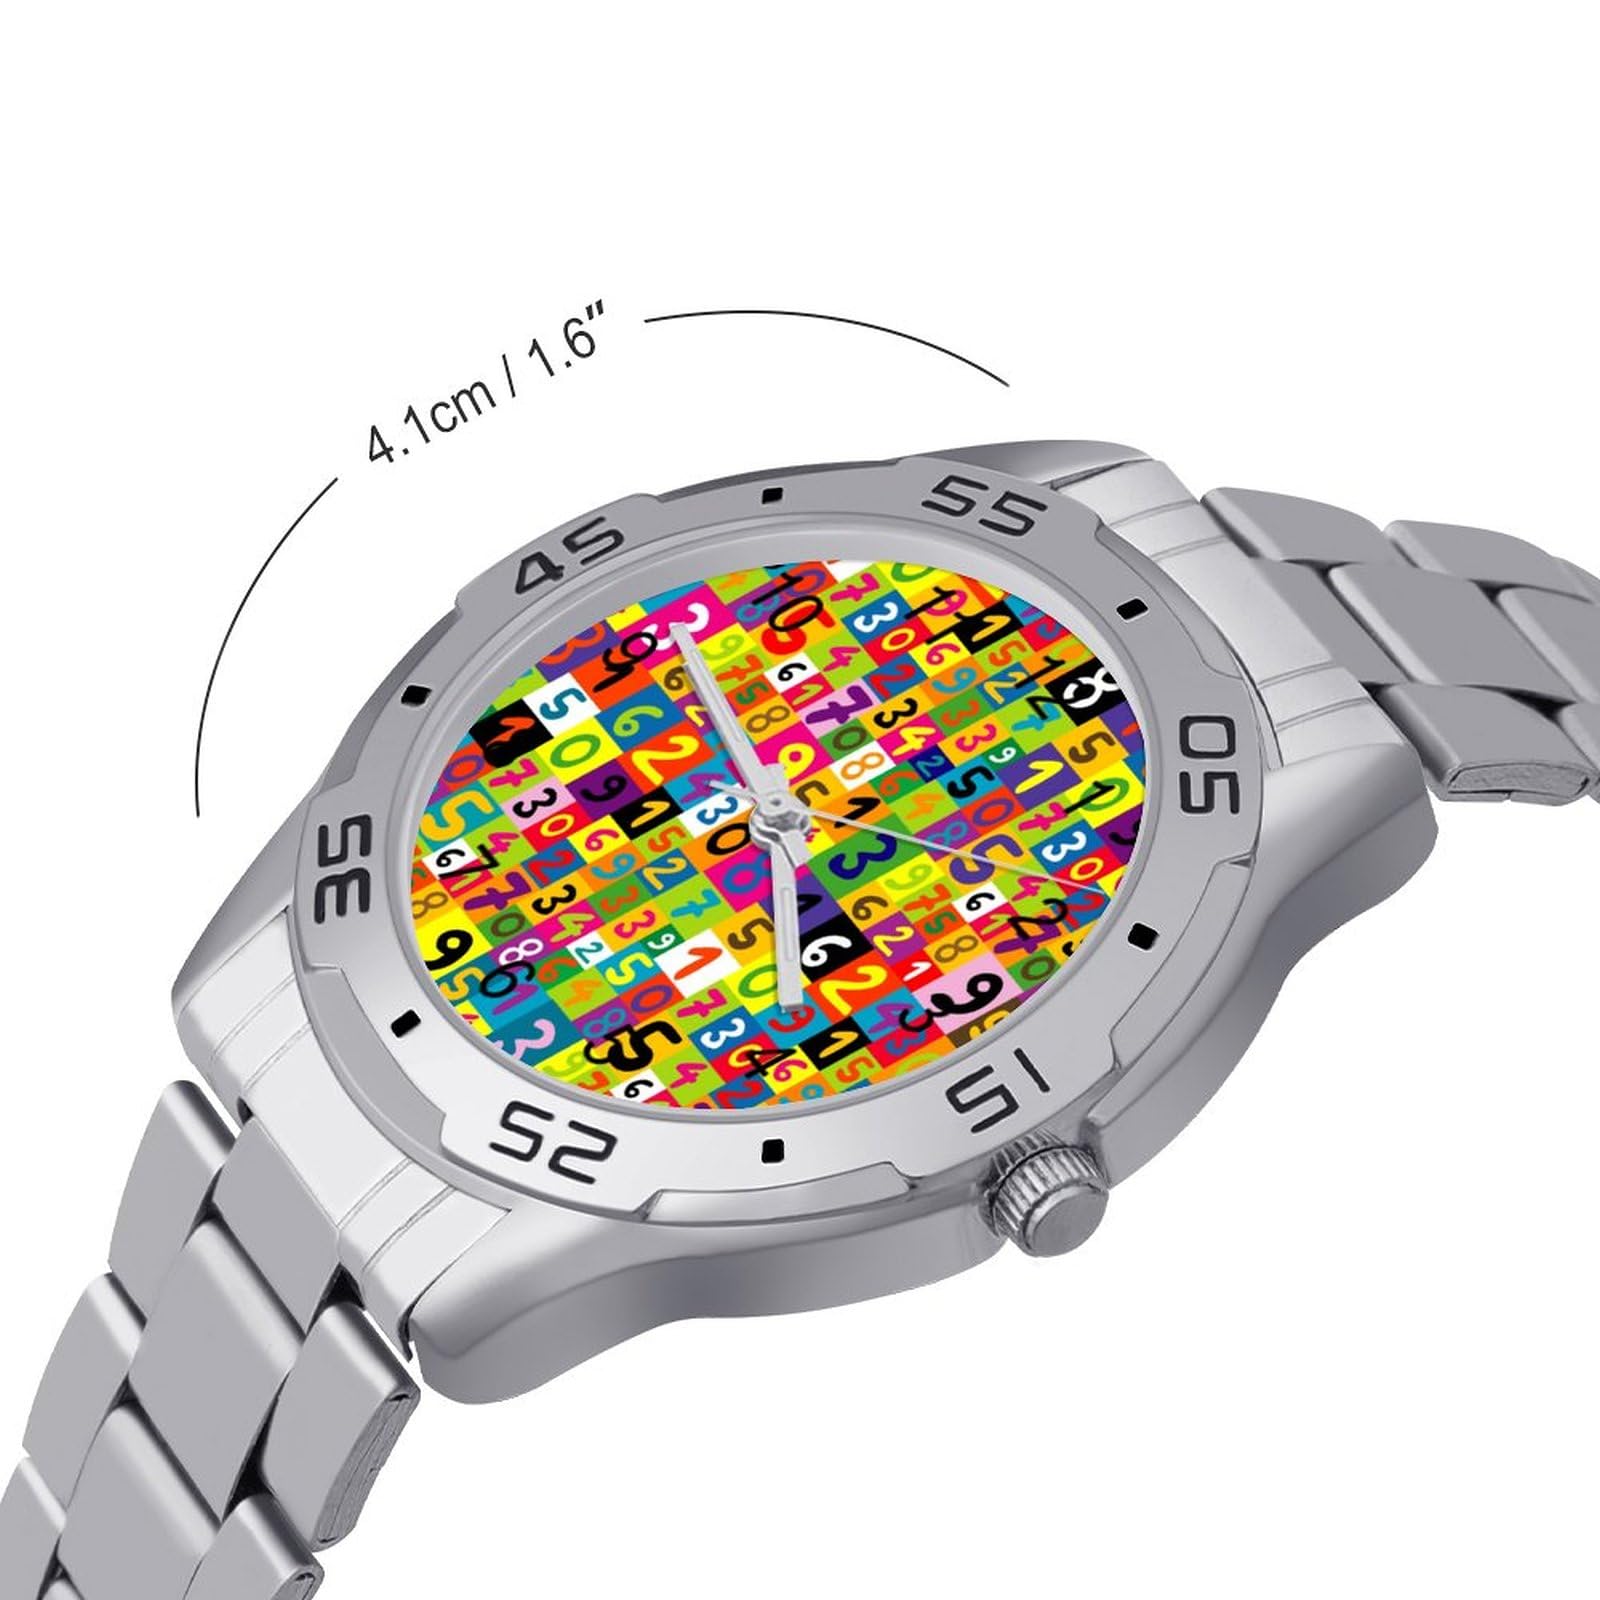 Kids with Numbers Stainless Steel Band Business Watch Dress Wrist Unique Luxury Work Casual Waterproof Watches